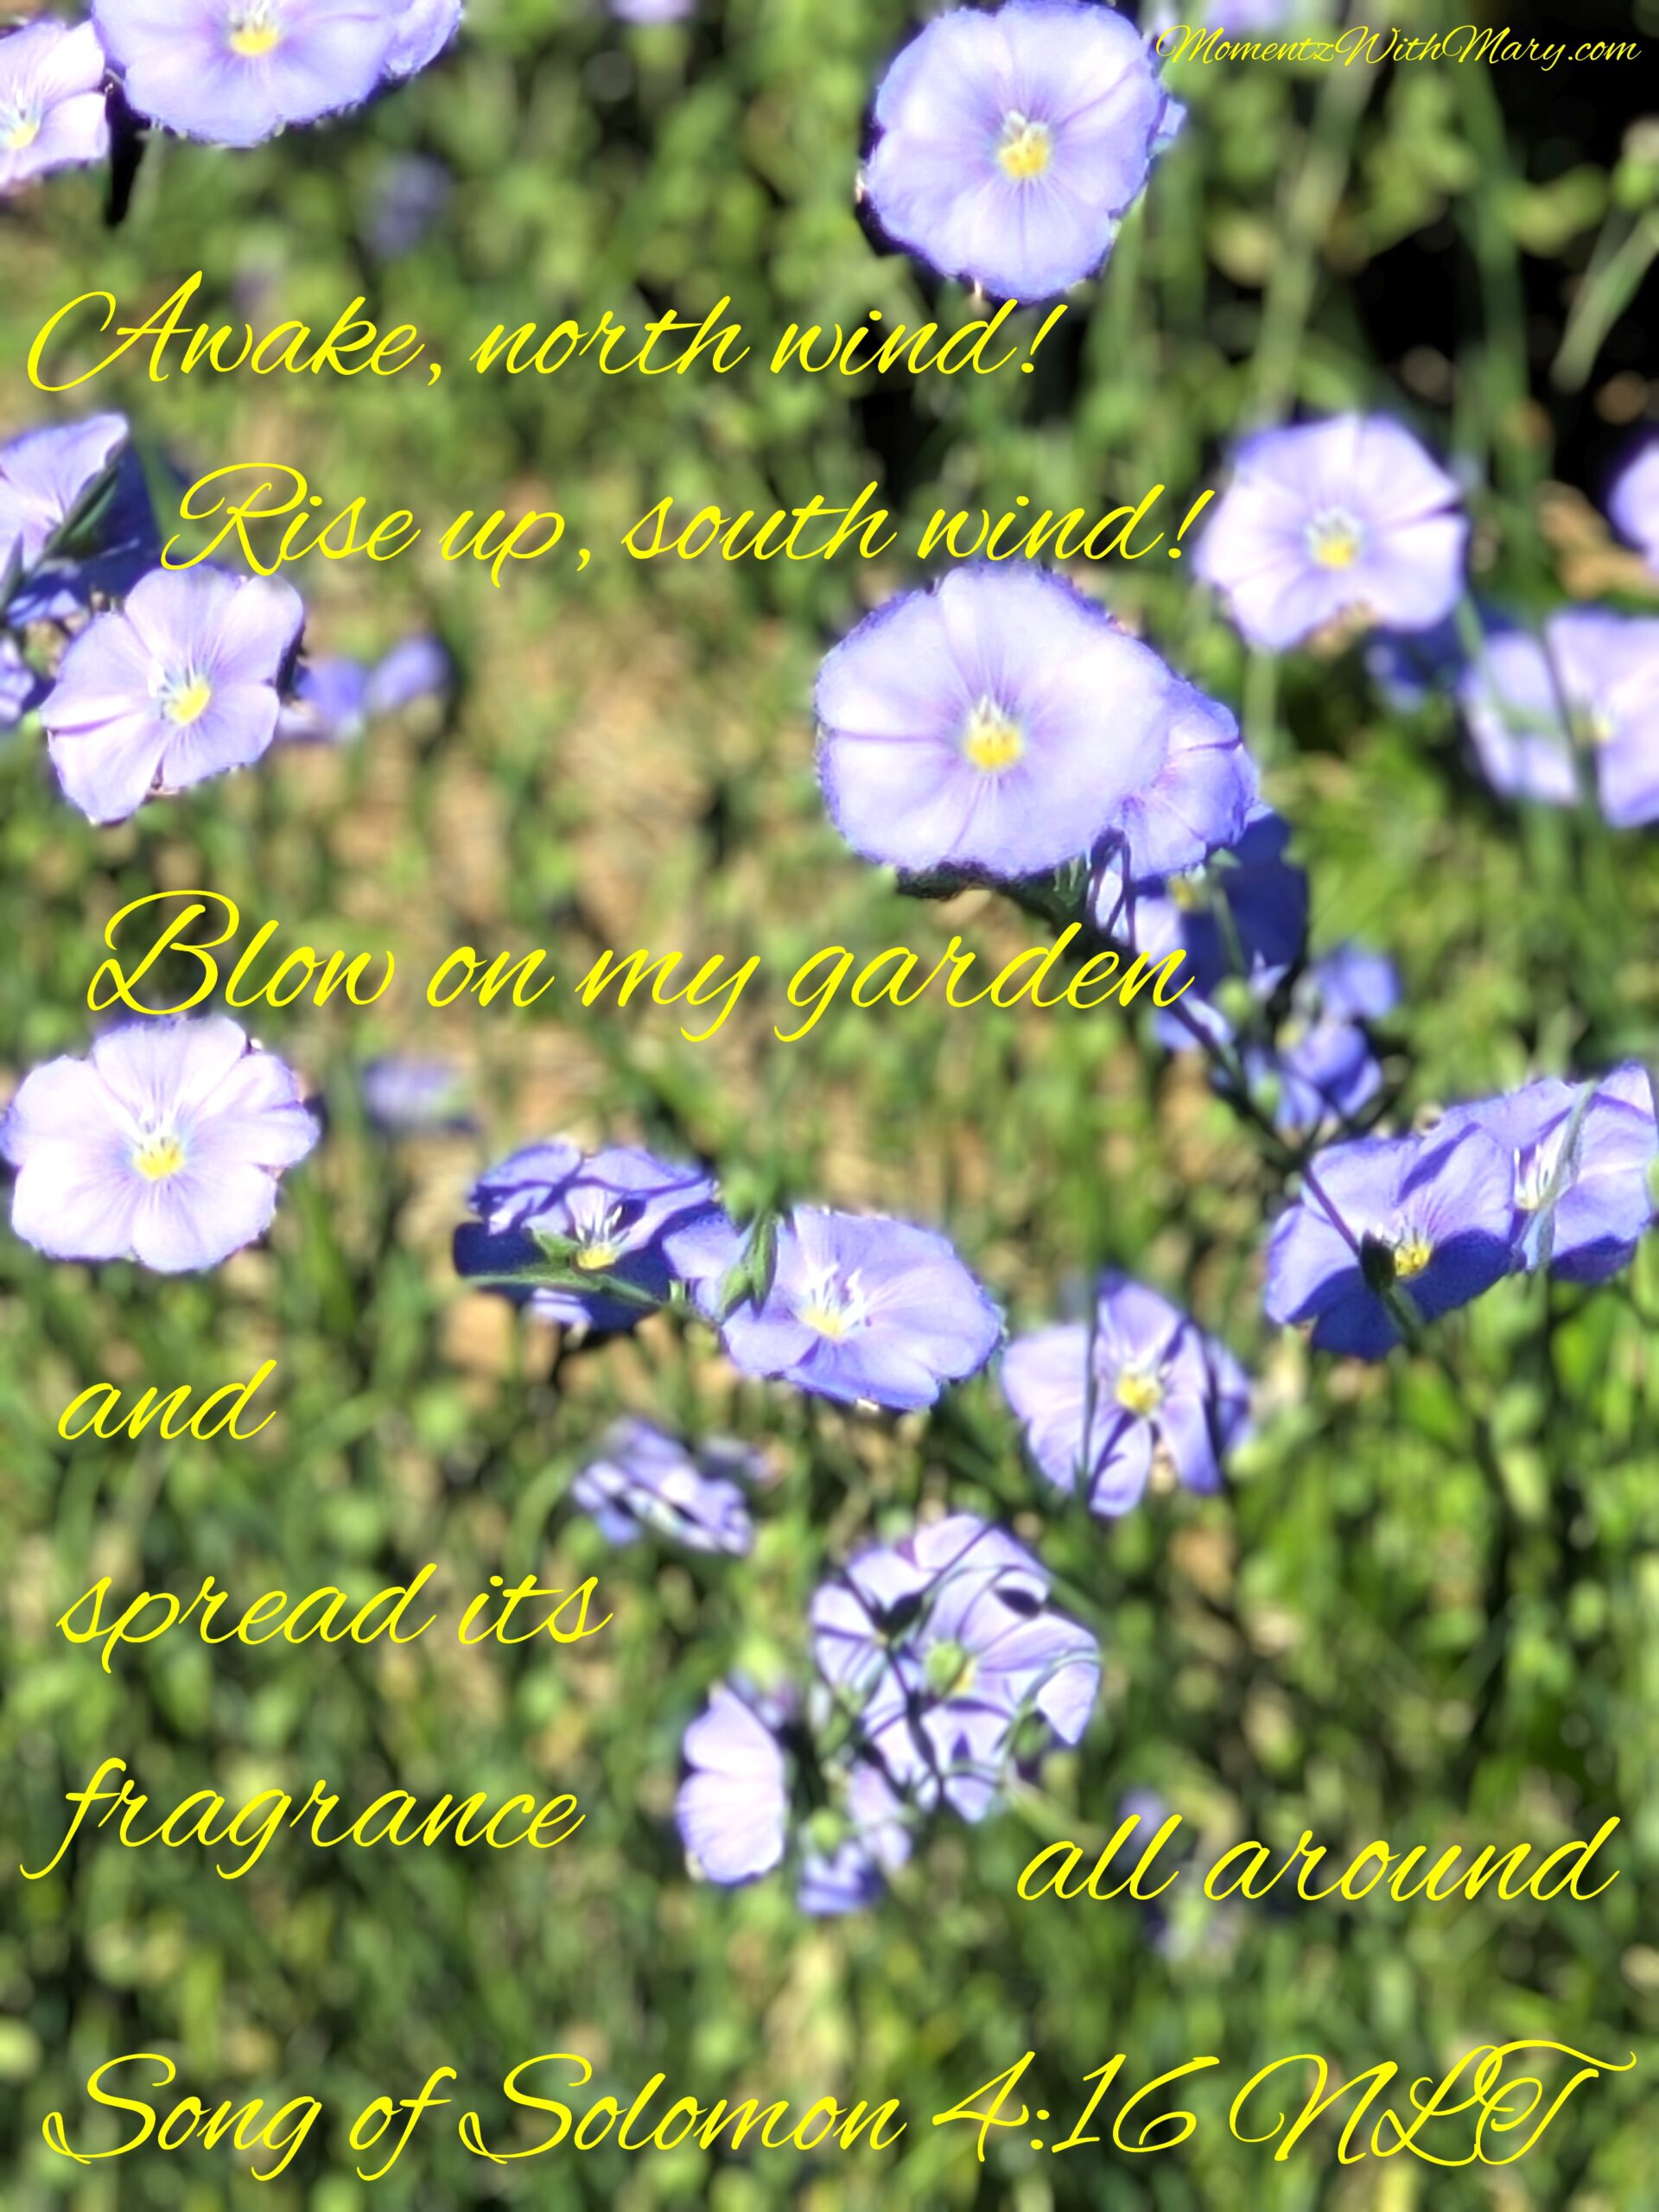 blue flax wildflowers Song of Solomon 4:16 NLT Awake, north wind! Rise up, south wind! Blow on my garden and spread its fragrance all around.